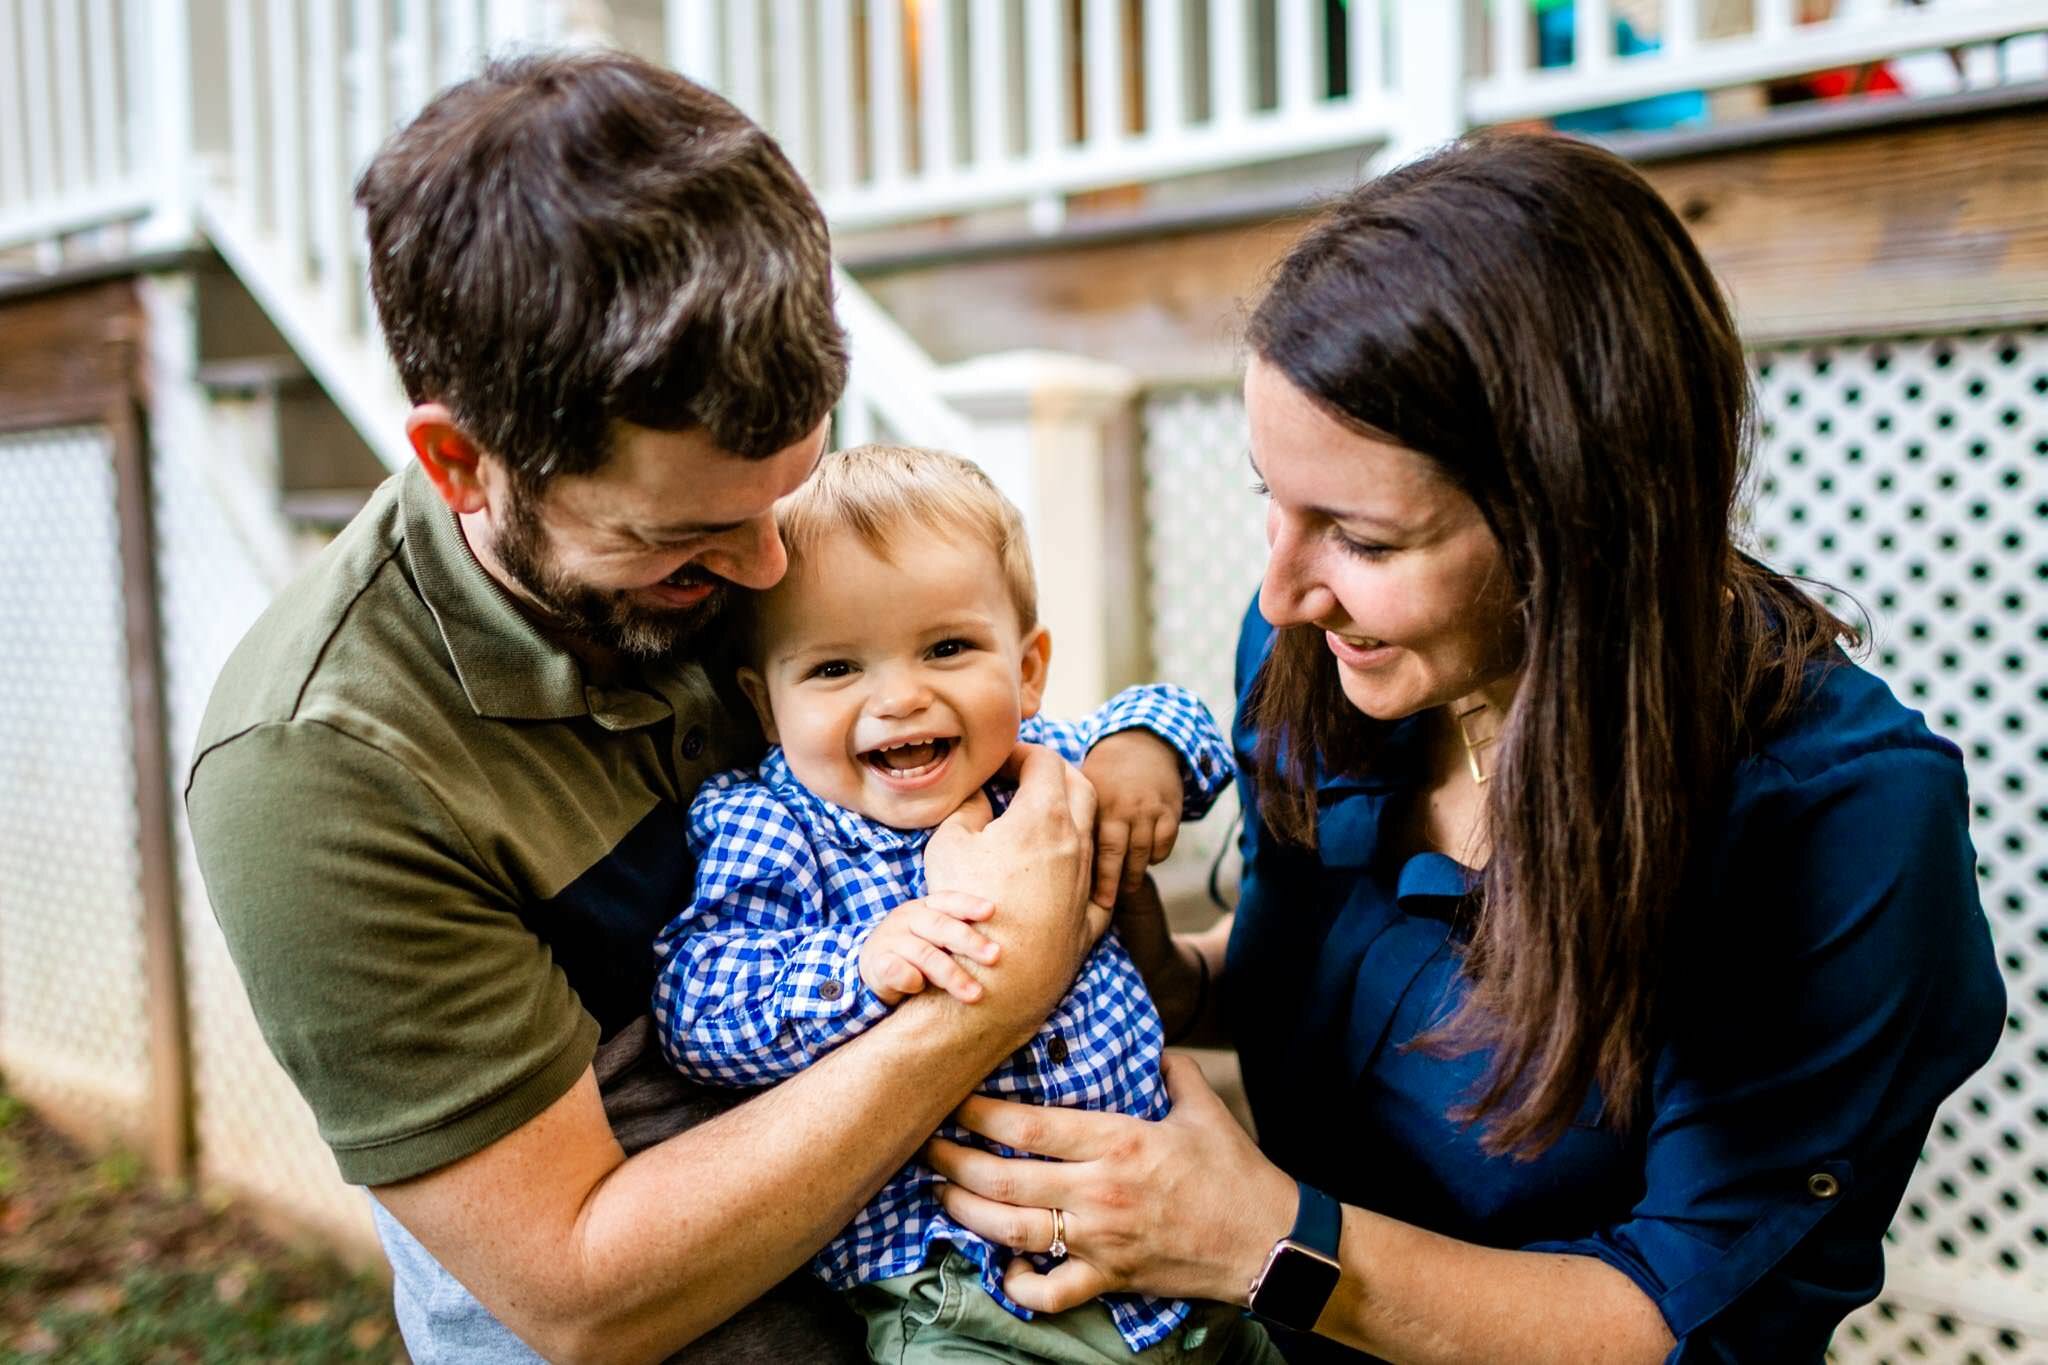 Raleigh Family Photographer | By G. Lin Photography | Baby smiling while parents tickling him